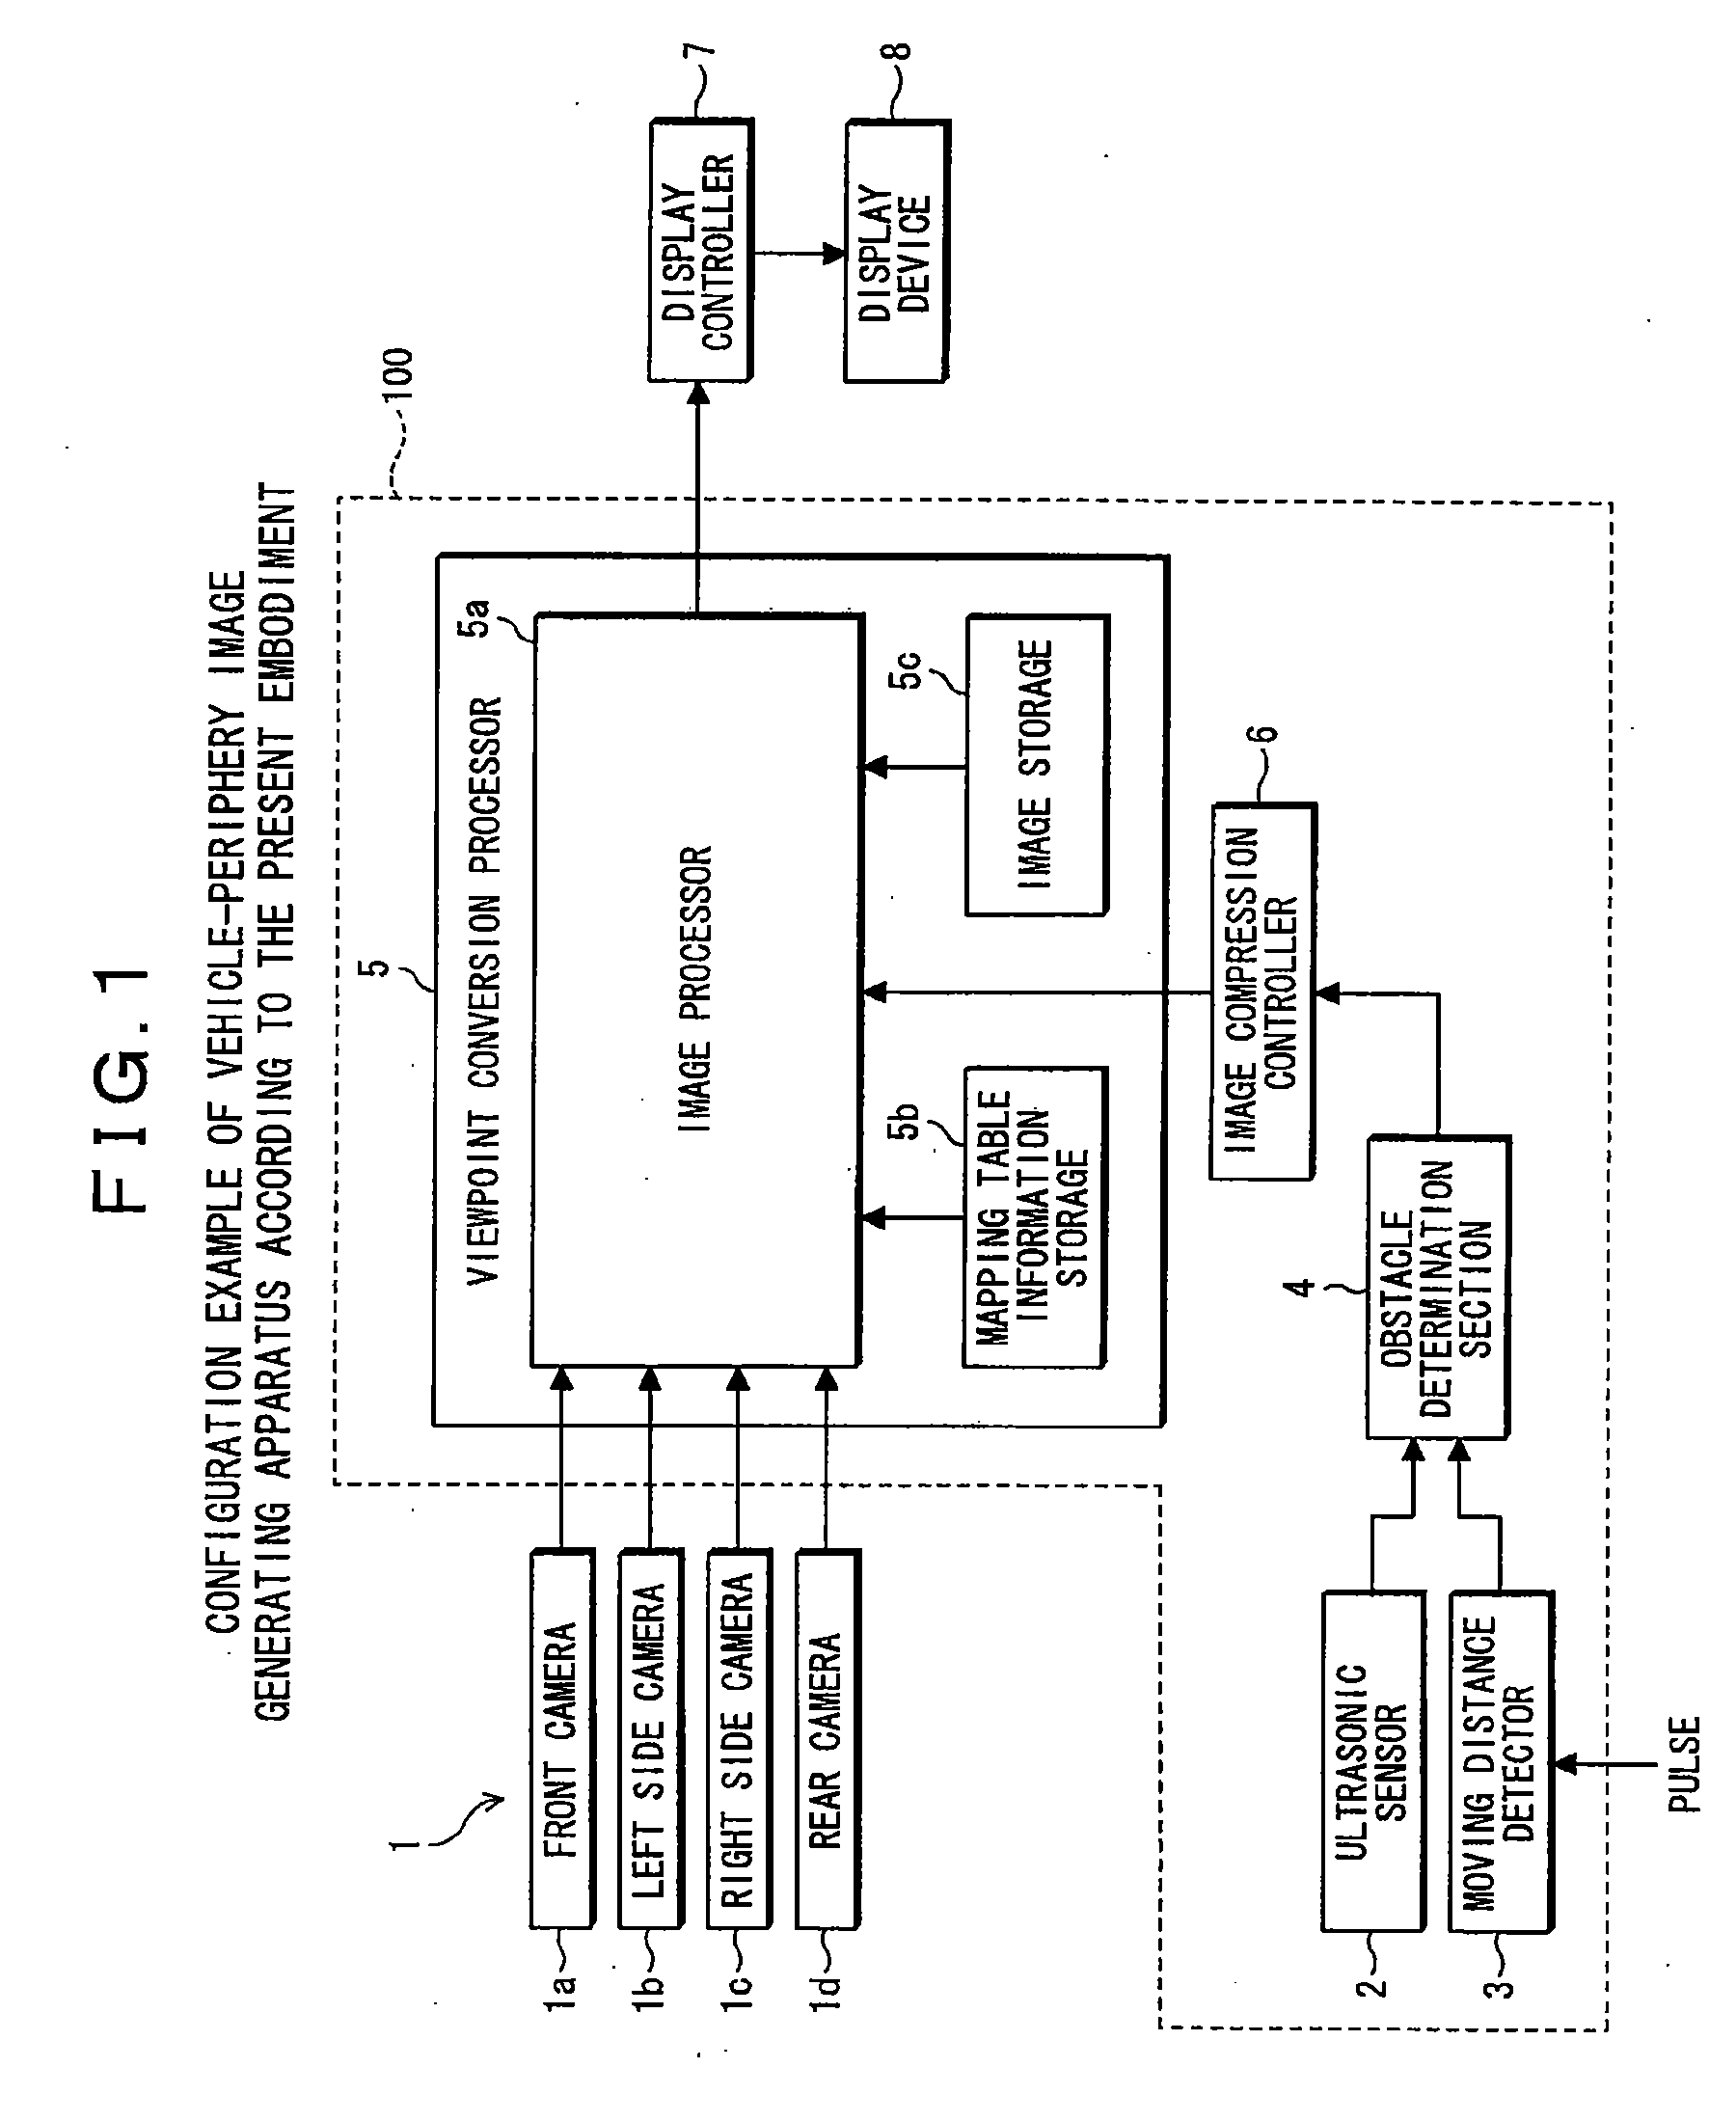 Vehicle-Periphery Image Generating Apparatus and Method of Correcting Distortion of a Vehicle-Periphery Image